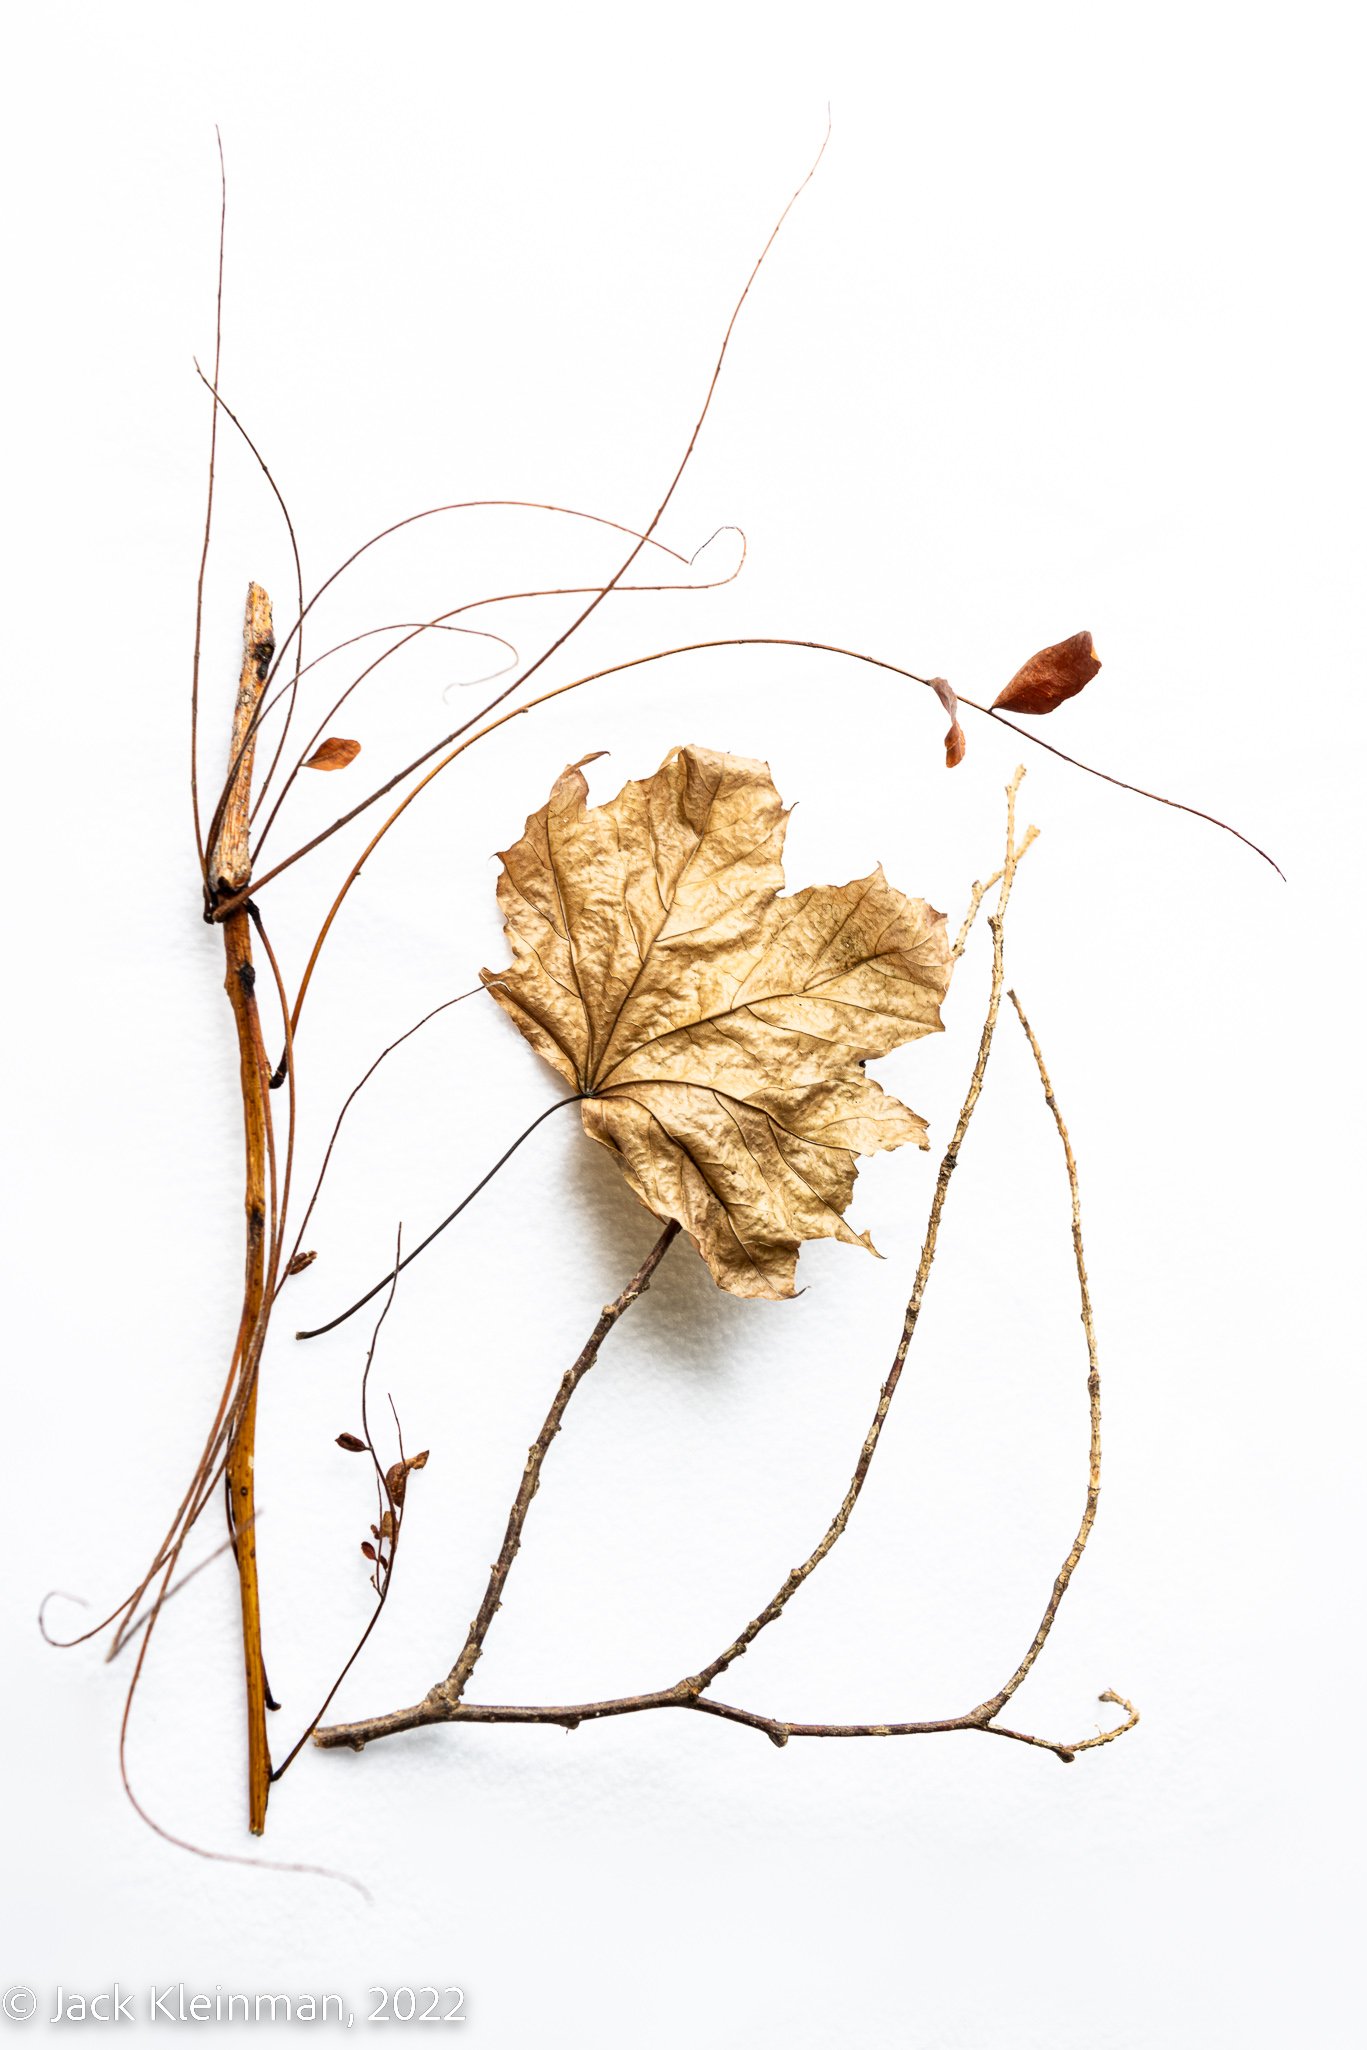 1st place still life - Dried Leaves and Twigs - Jack Kleinman